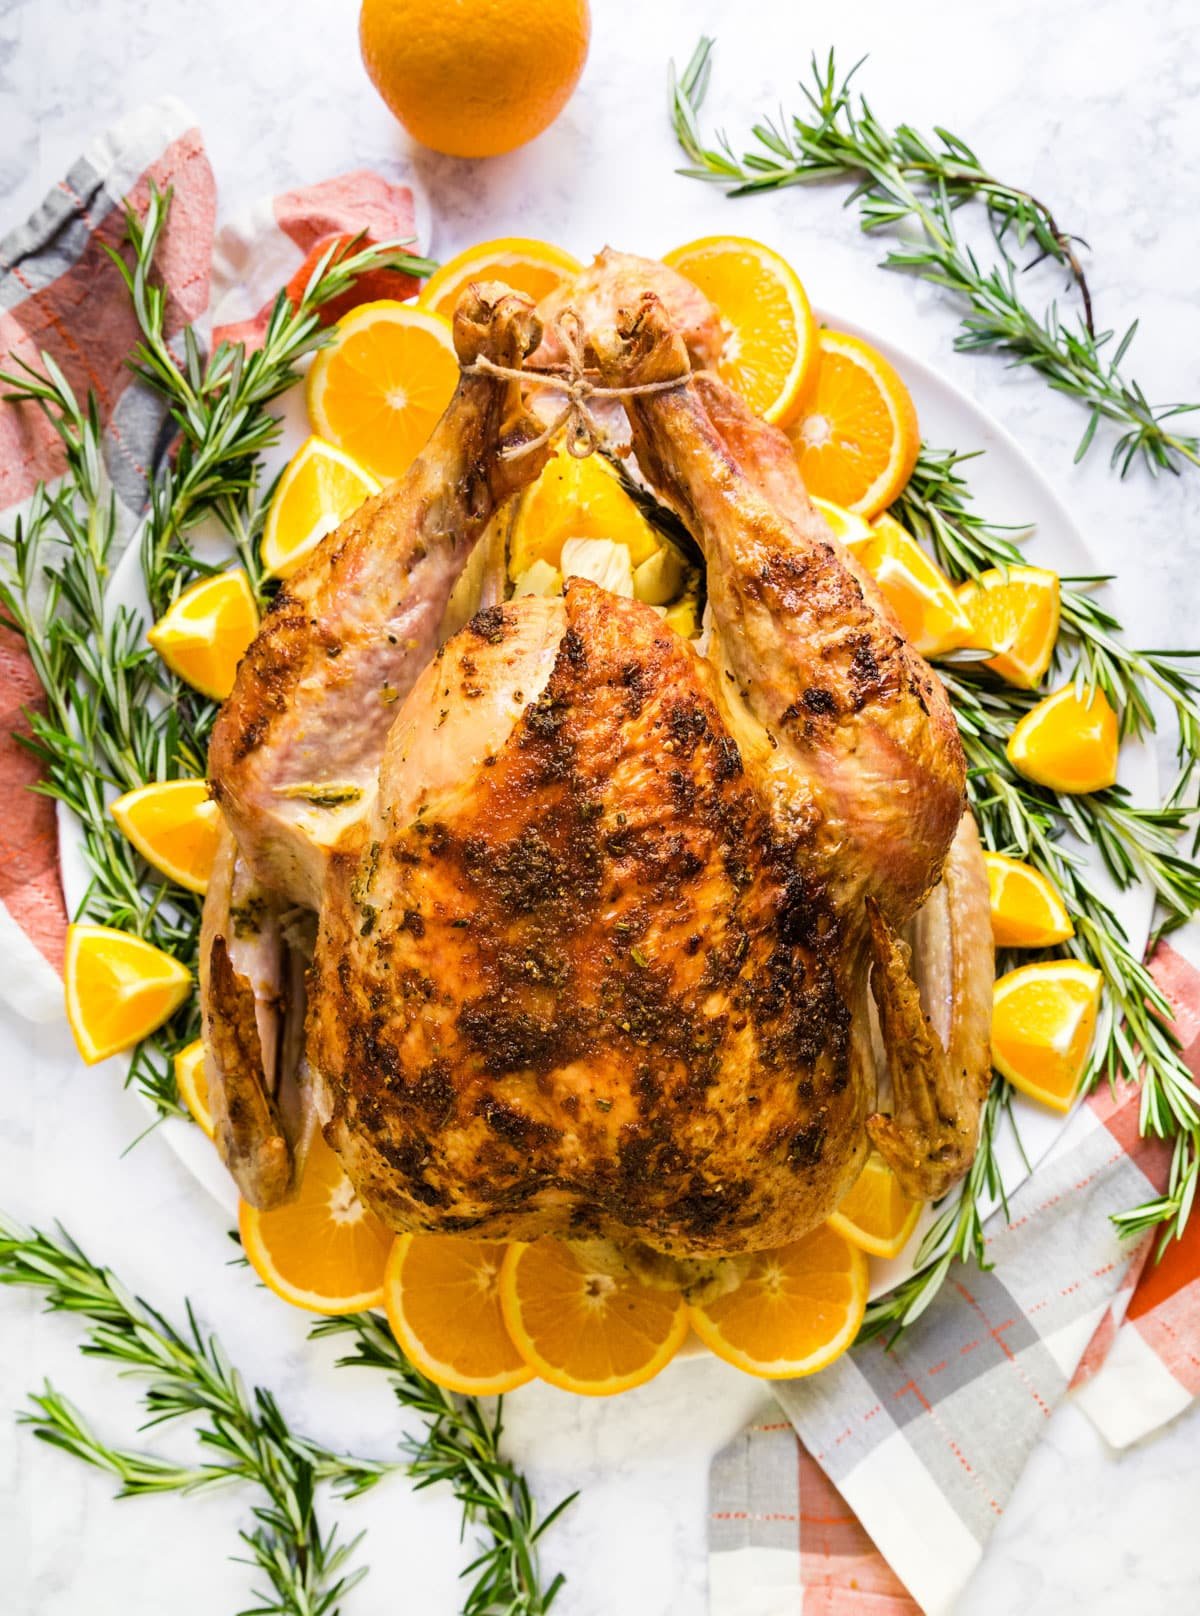 An overhead image of a whole turkey on a platter with rosemary and oranges.